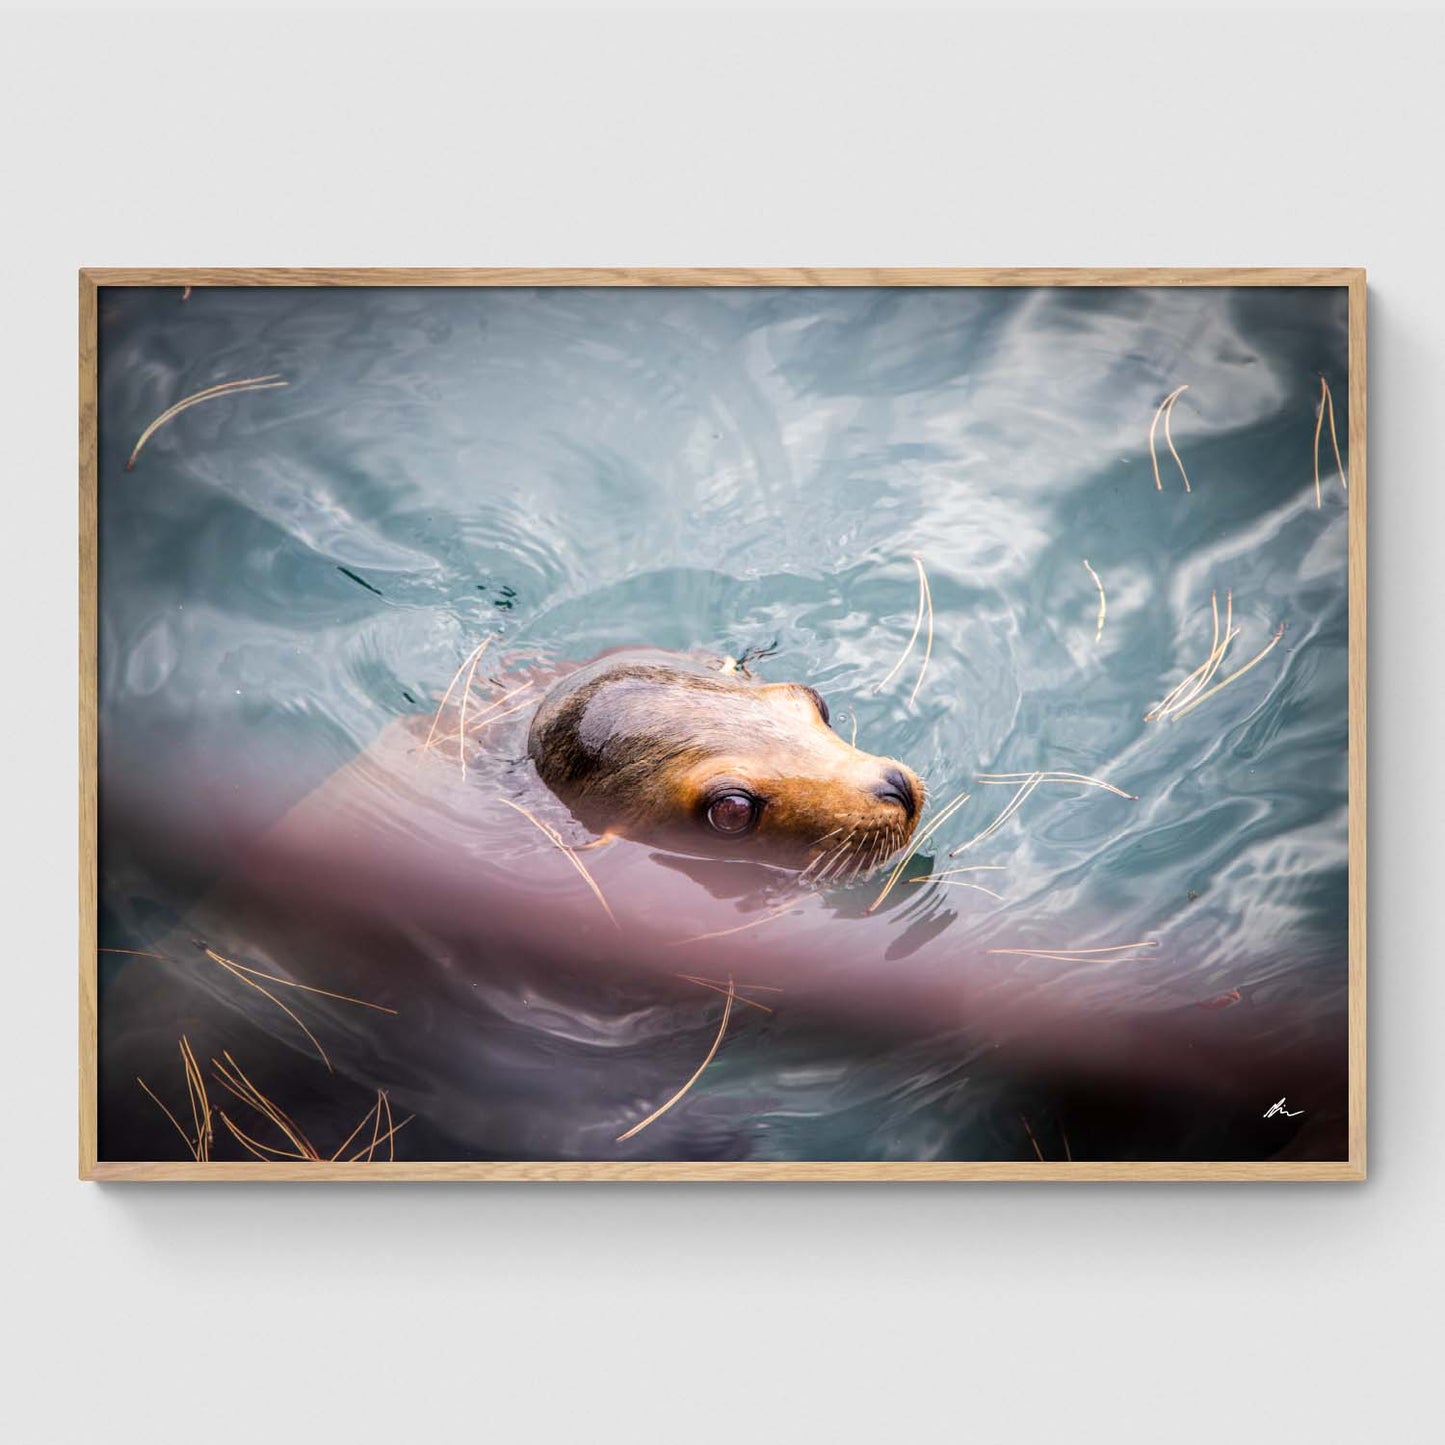 Sea lion in the water